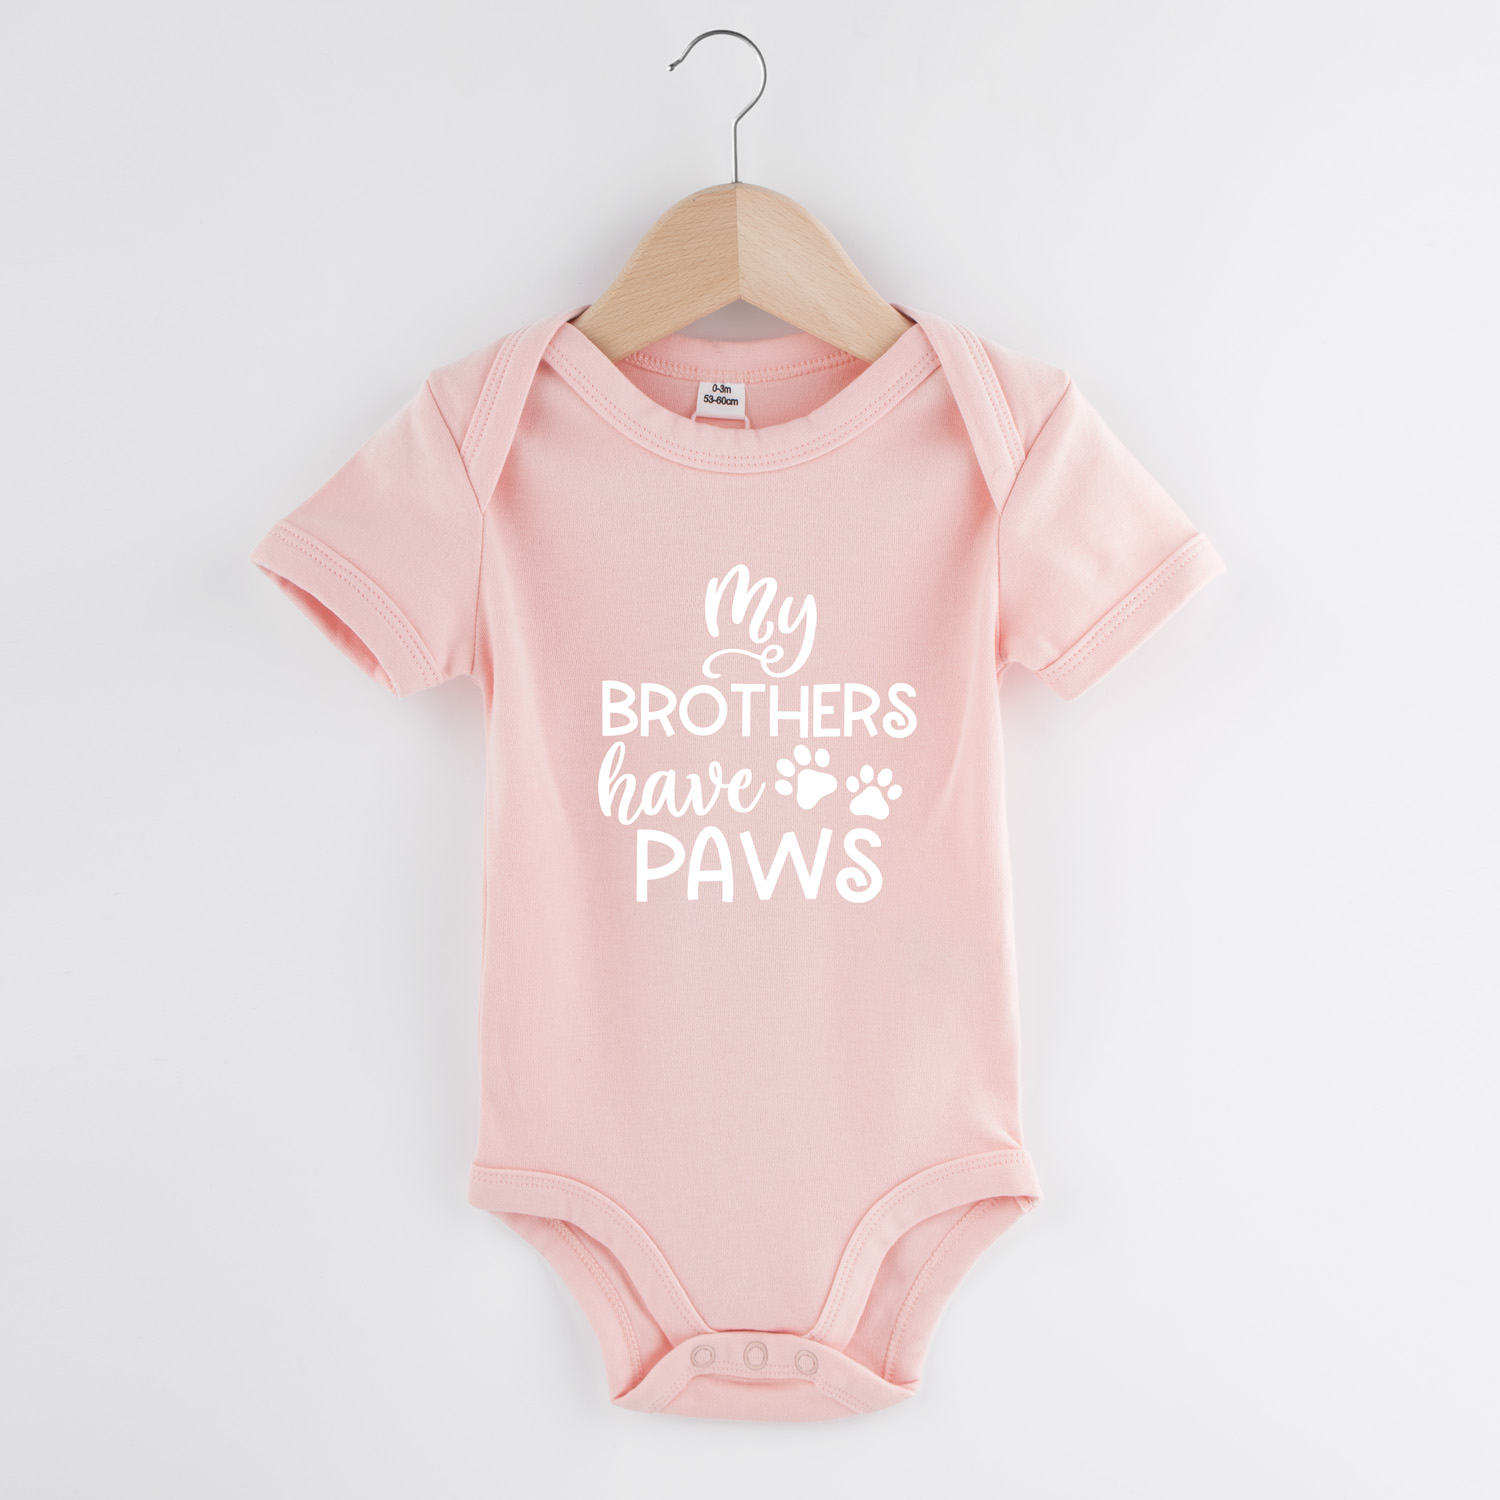 my-brothers-have-paws-baby-romper-powder-pink.jpg